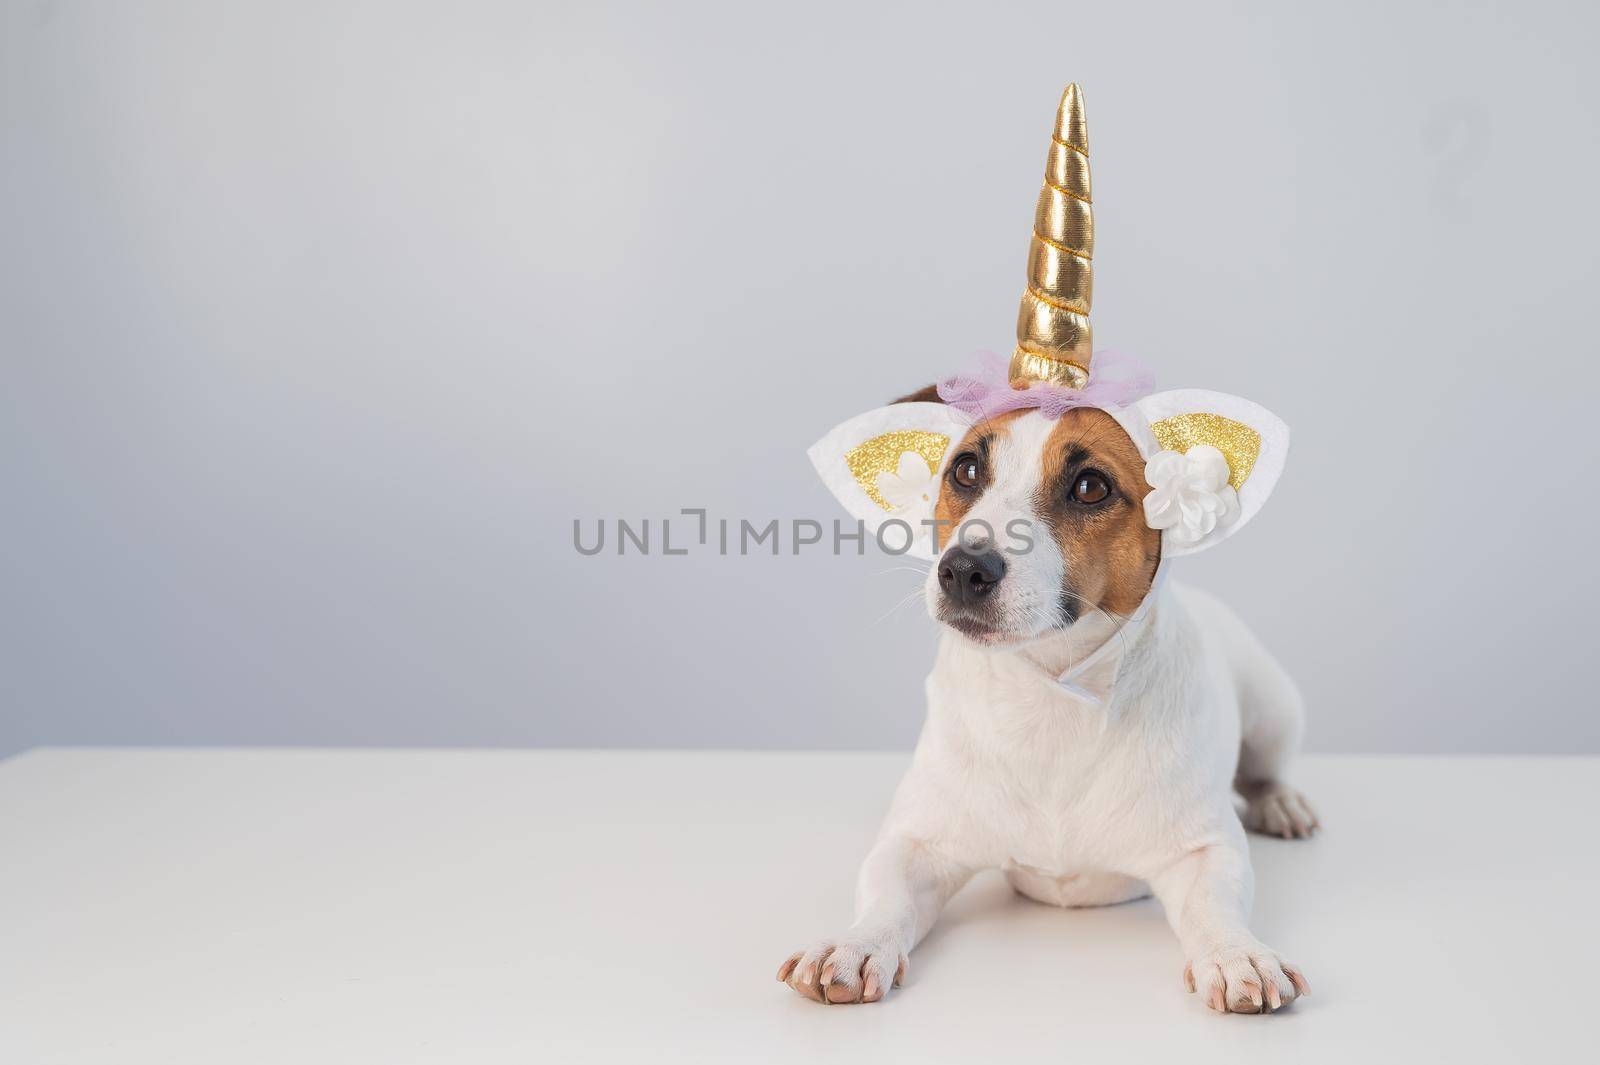 Cute jack russell terrier dog in unicorn headband on white background. Copy space.